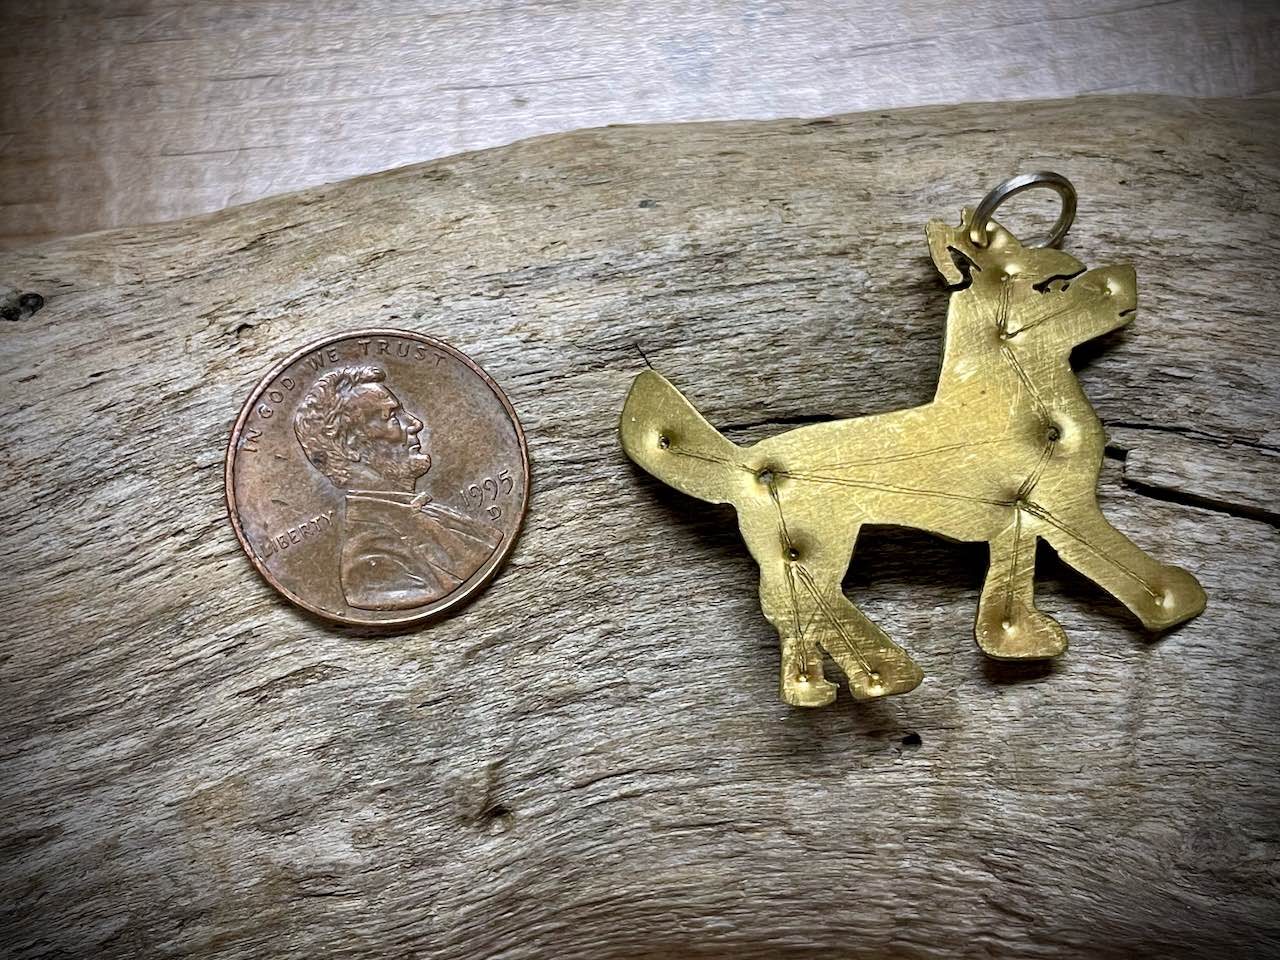 Canis Major Pendant by Nori Greer